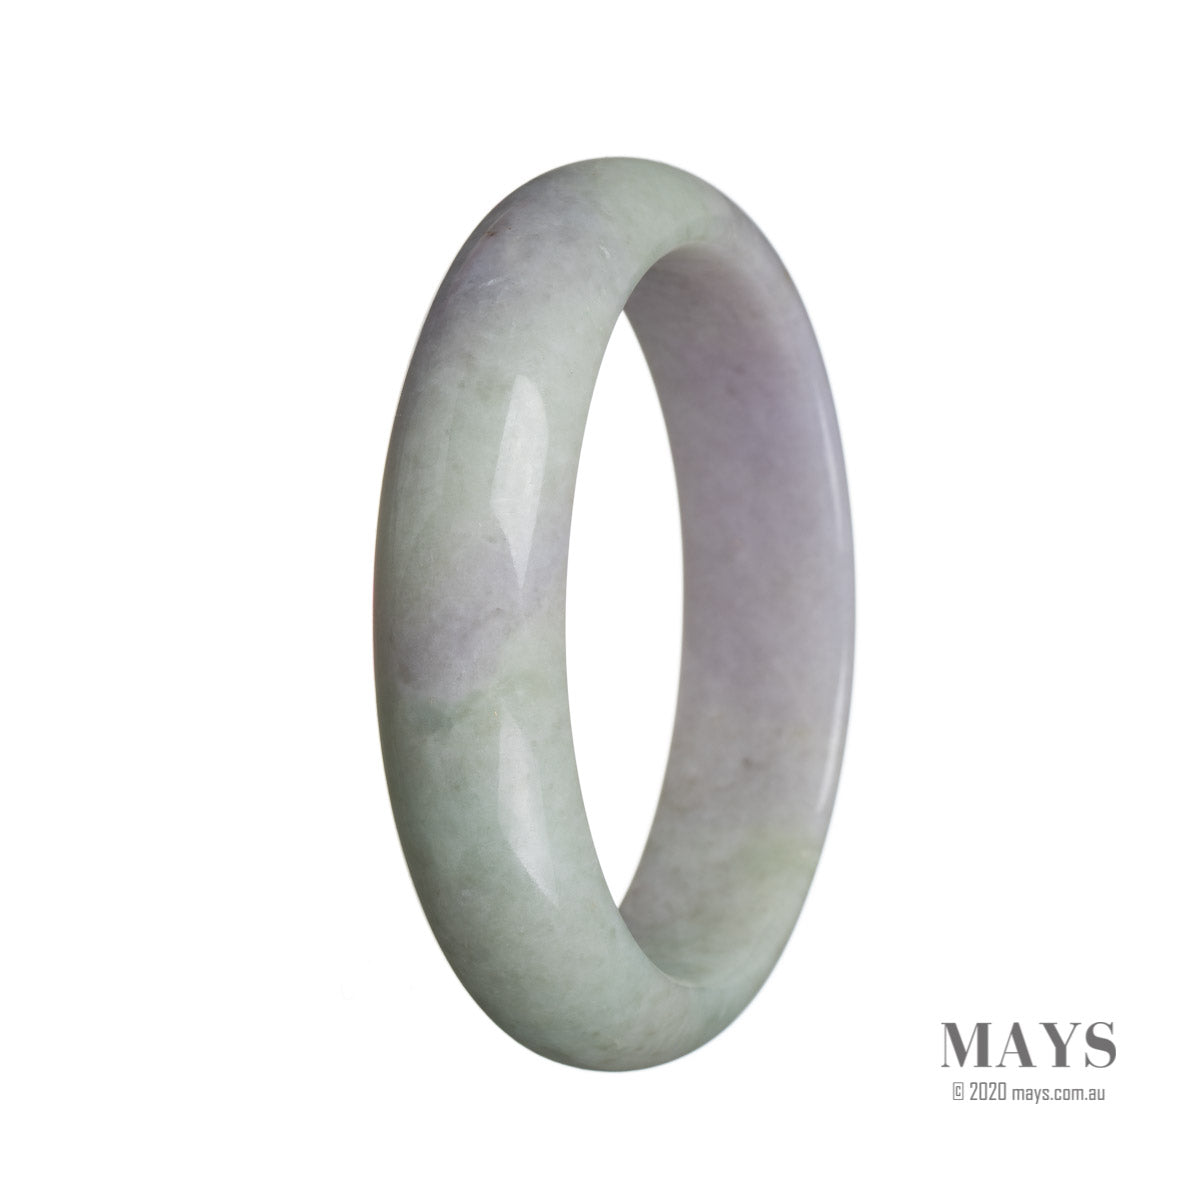 A beautiful half moon-shaped jade bangle in genuine Grade A green with a hint of lavender color.